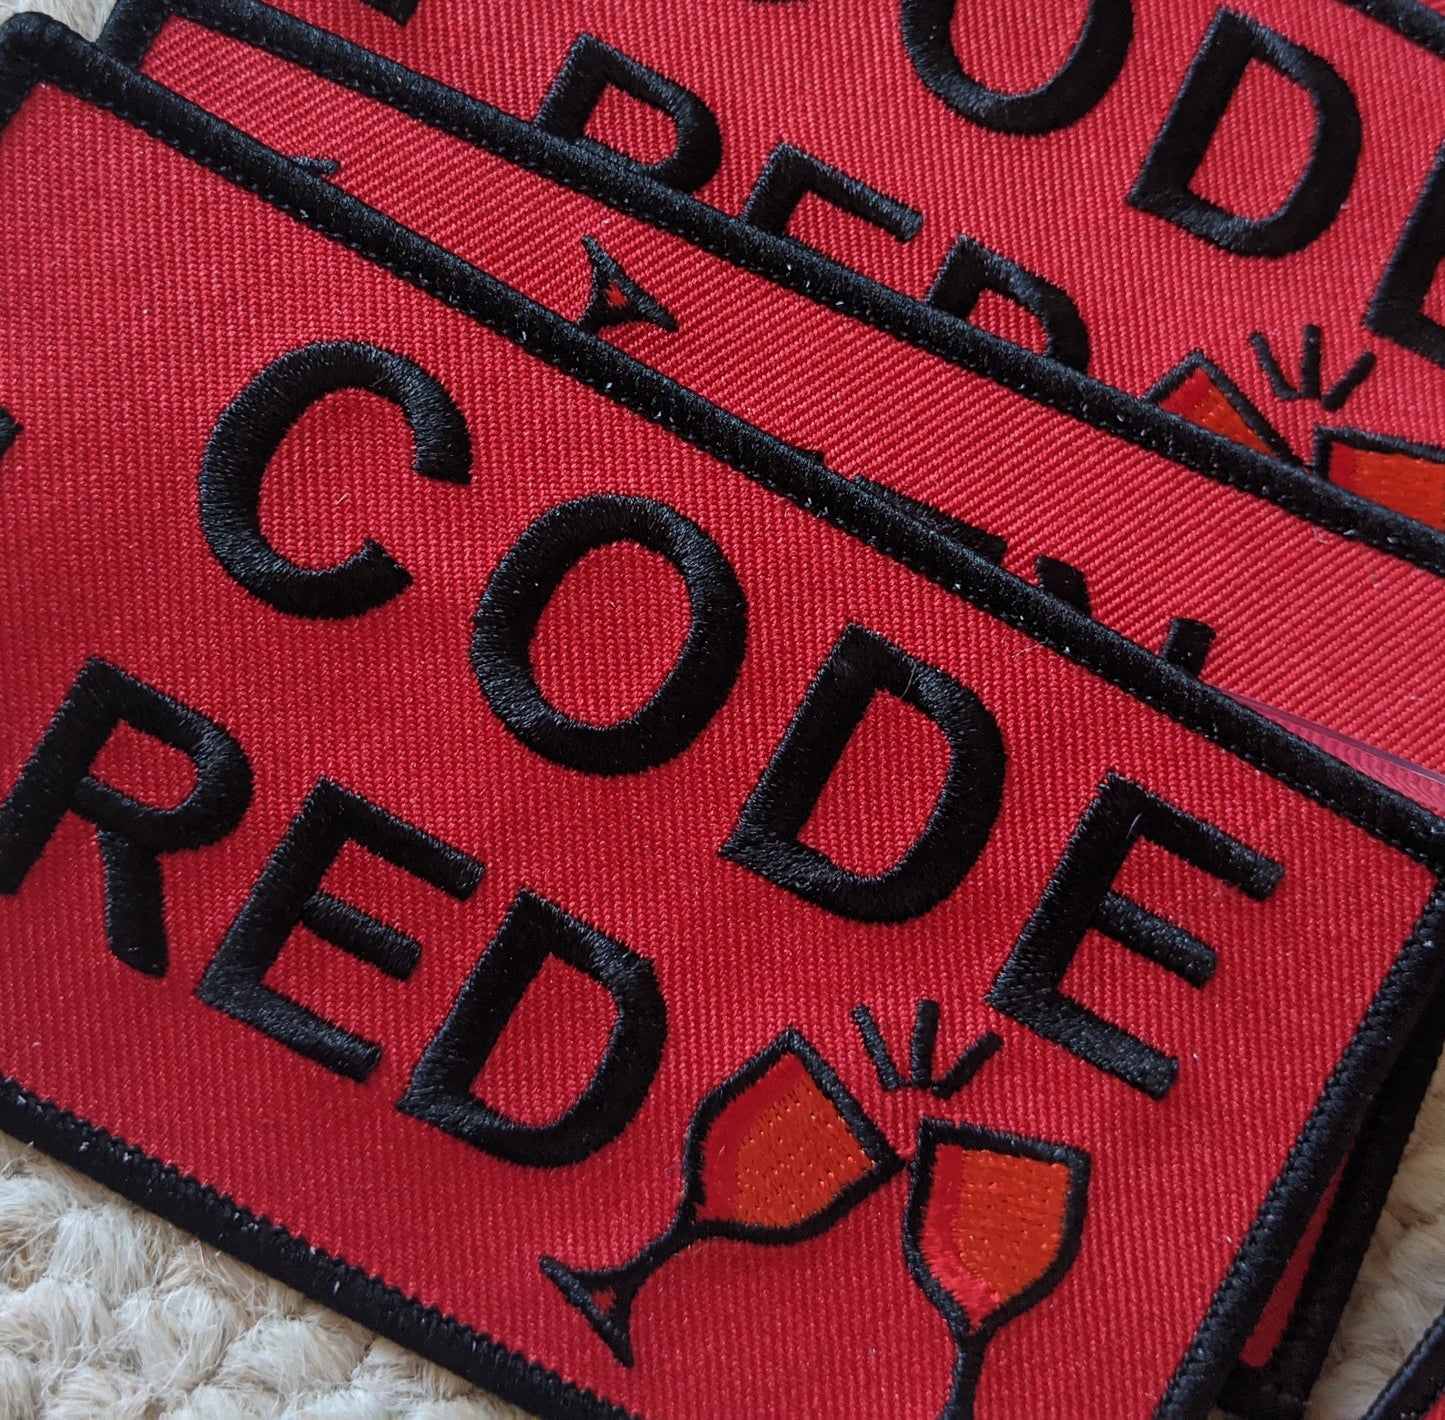 CODE RED Luggage Tag